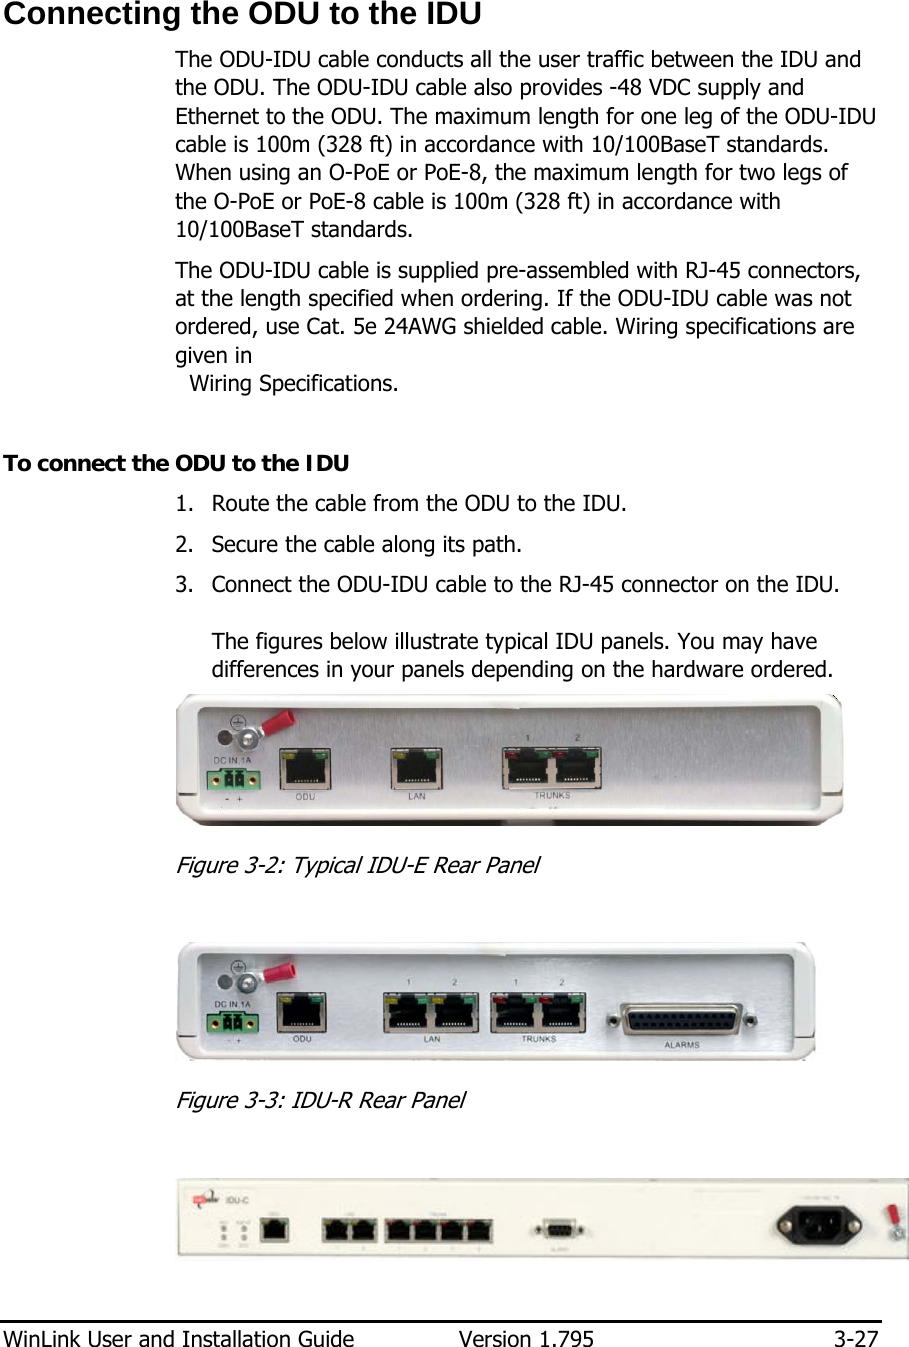  WinLink User and Installation Guide  Version 1.795  3-27  Connecting the ODU to the IDU The ODU-IDU cable conducts all the user traffic between the IDU and the ODU. The ODU-IDU cable also provides -48 VDC supply and Ethernet to the ODU. The maximum length for one leg of the ODU-IDU cable is 100m (328 ft) in accordance with 10/100BaseT standards. When using an O-PoE or PoE-8, the maximum length for two legs of the O-PoE or PoE-8 cable is 100m (328 ft) in accordance with 10/100BaseT standards. The ODU-IDU cable is supplied pre-assembled with RJ-45 connectors, at the length specified when ordering. If the ODU-IDU cable was not ordered, use Cat. 5e 24AWG shielded cable. Wiring specifications are given in    Wiring Specifications.  To connect the ODU to the IDU 1. Route the cable from the ODU to the IDU.  2. Secure the cable along its path. 3. Connect the ODU-IDU cable to the RJ-45 connector on the IDU.  The figures below illustrate typical IDU panels. You may have differences in your panels depending on the hardware ordered.   Figure  3-2: Typical IDU-E Rear Panel   Figure  3-3: IDU-R Rear Panel    